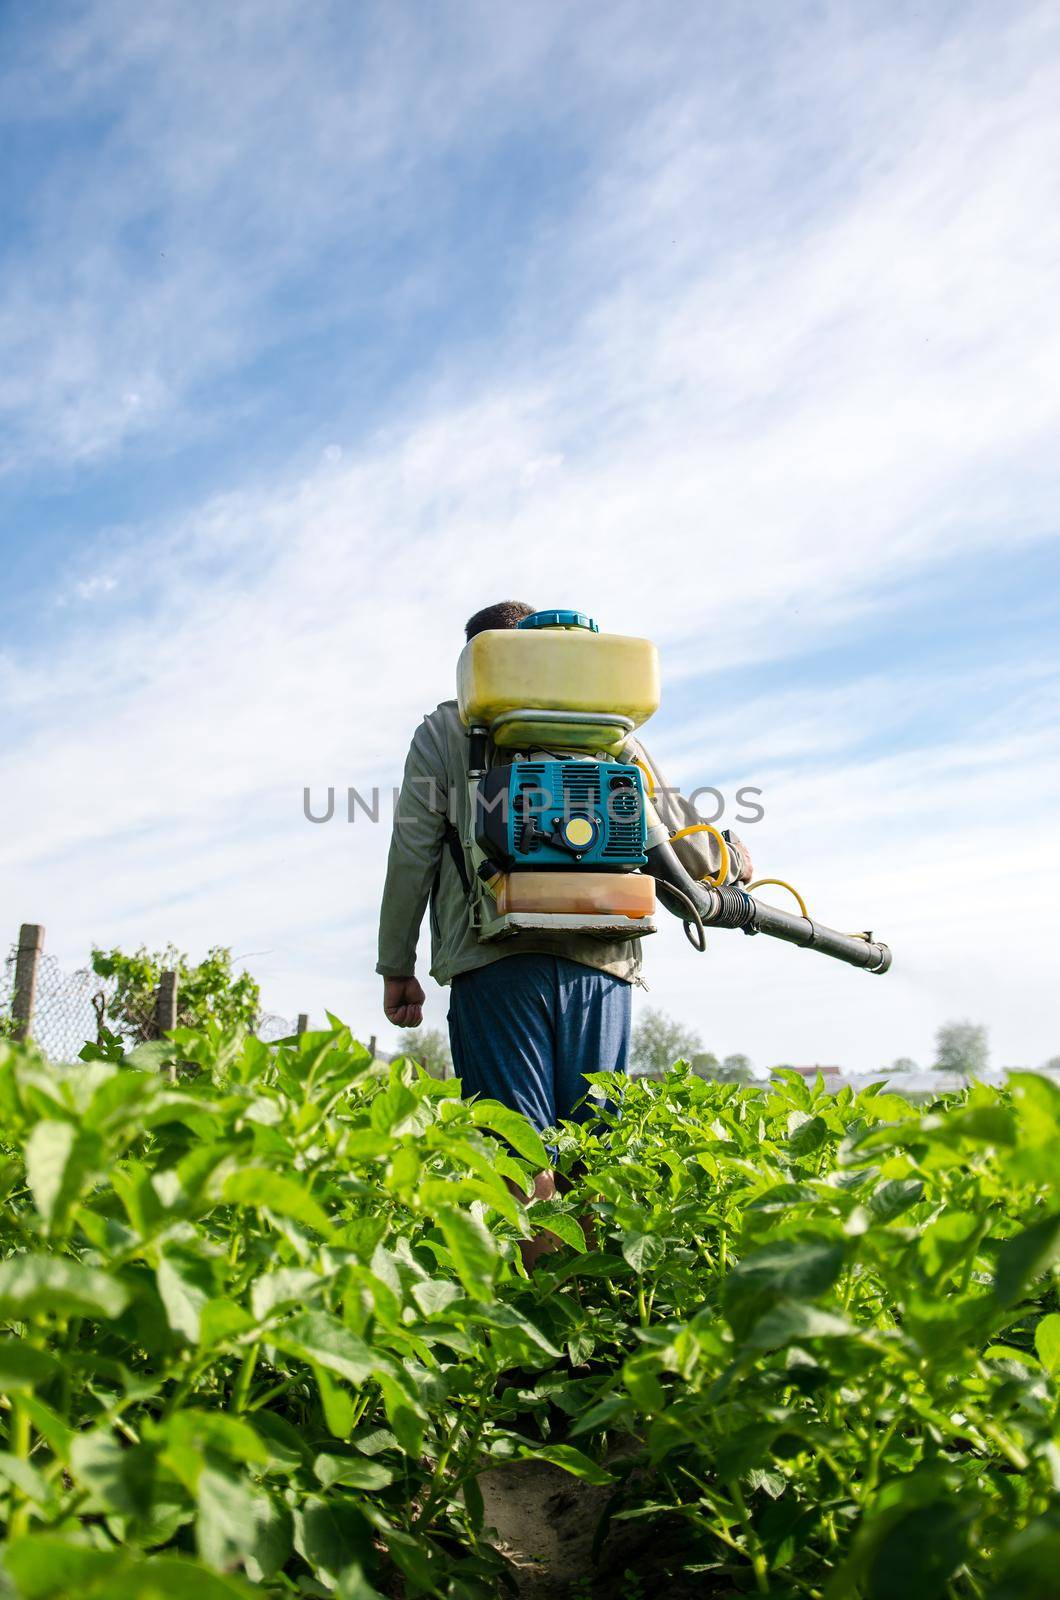 Farmer with a mist sprayer walks through farm field. Protection of cultivated plants from insects and fungal infections. Use of chemicals for crop protection in agriculture. Farming growing vegetables by iLixe48